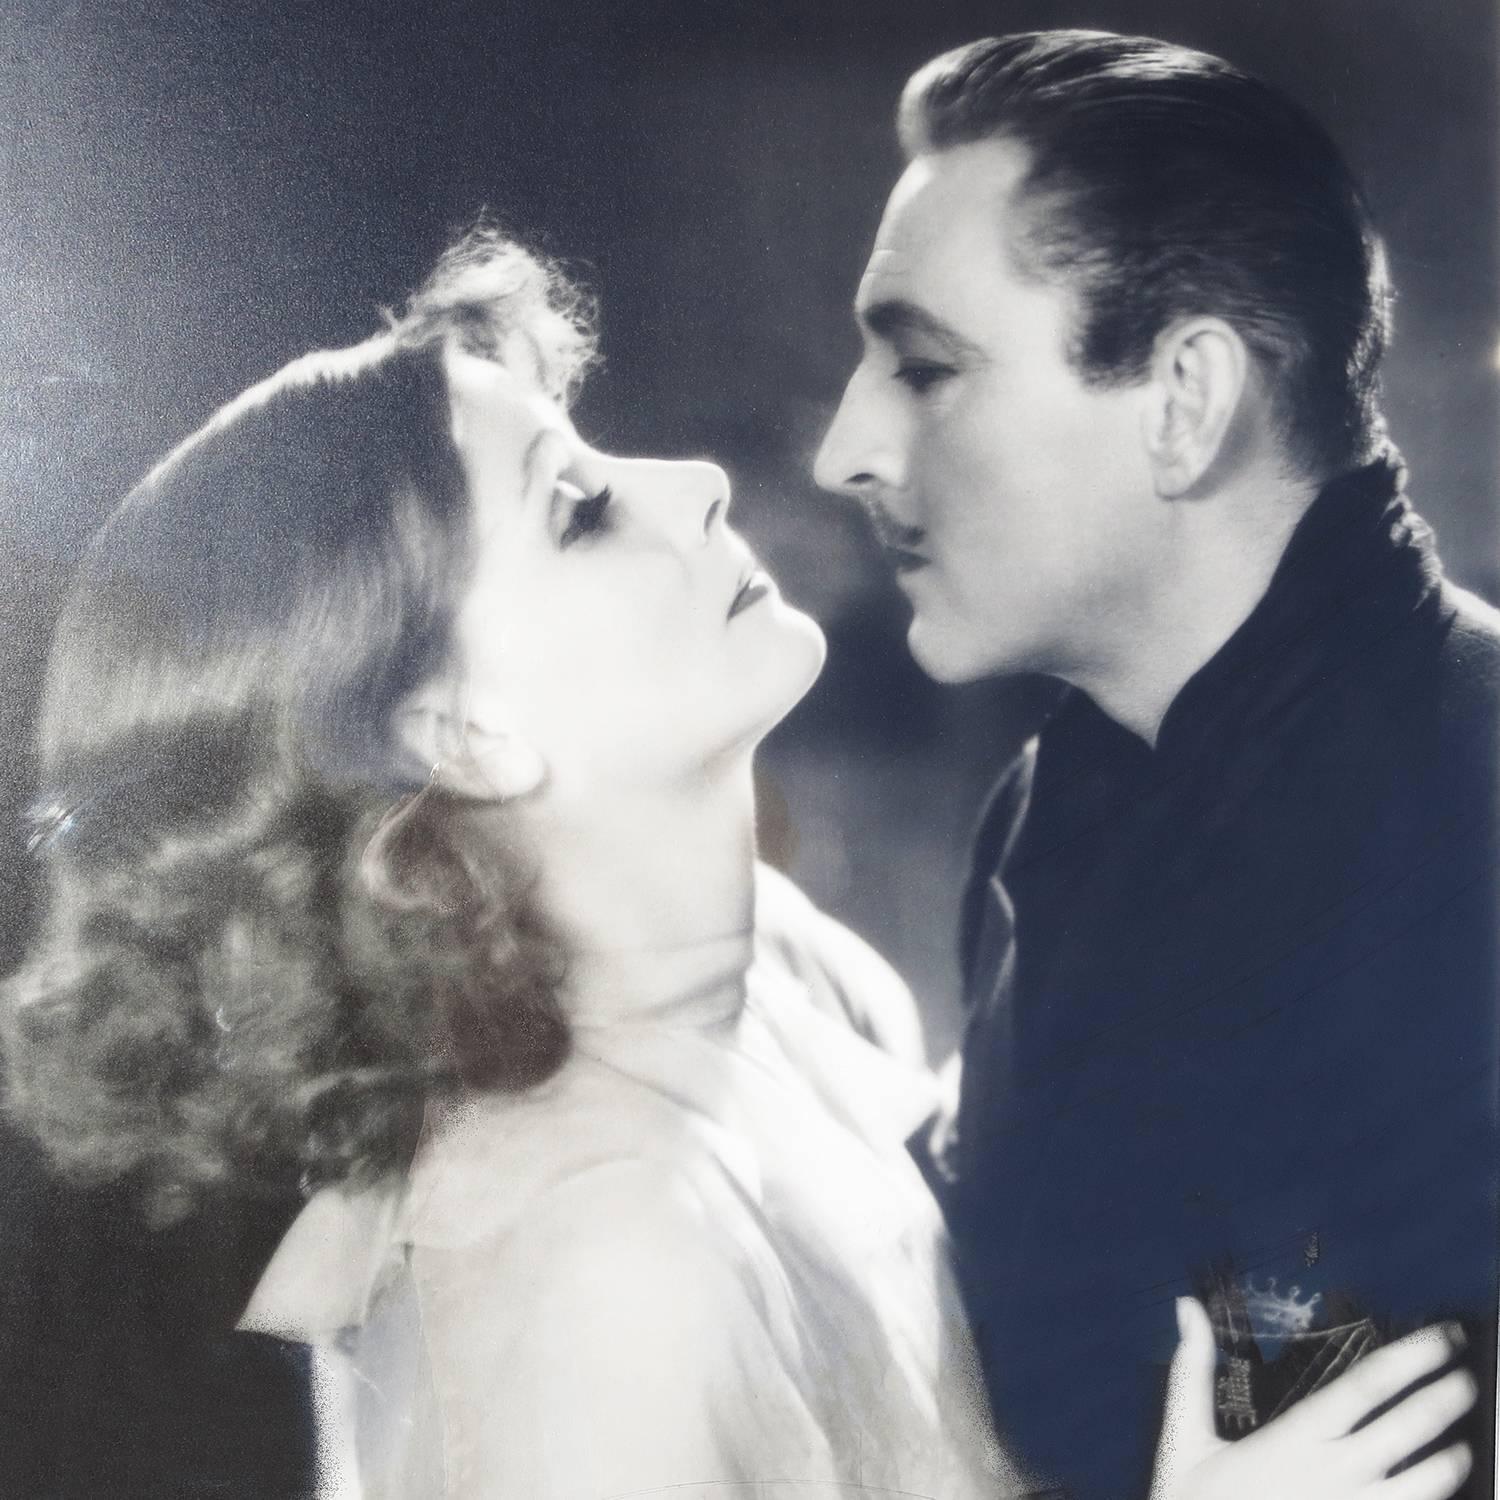 American Large 1933 Greta Garbo and John Barrymore by George Hurrell Signed and Numbered